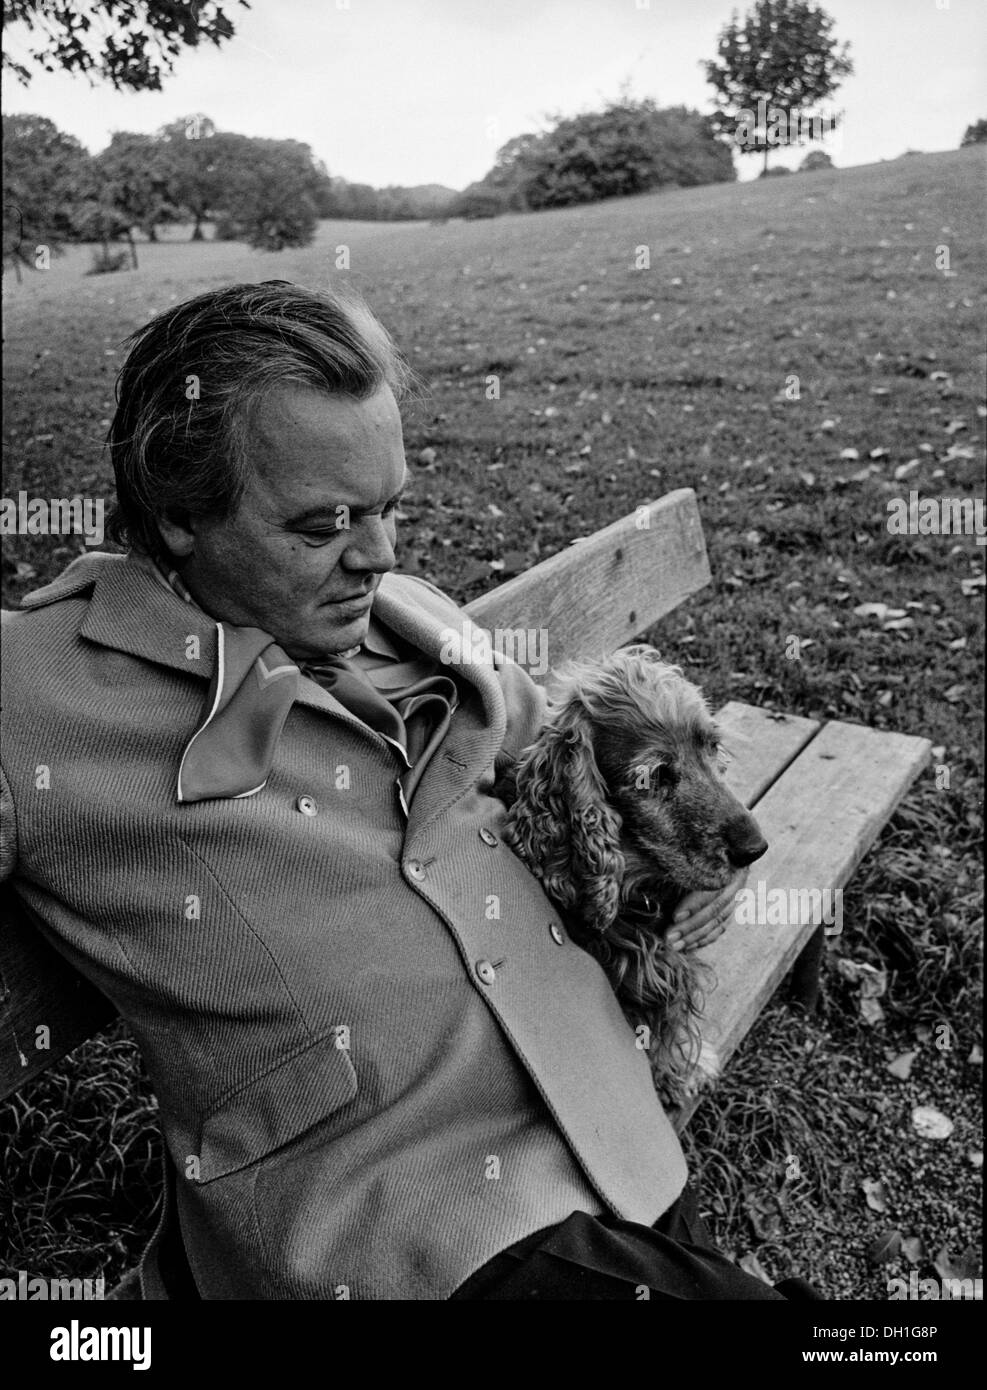 British actor Patrick Wymark photographed in Hampstead, London in September 1969. He died a year later. Stock Photo